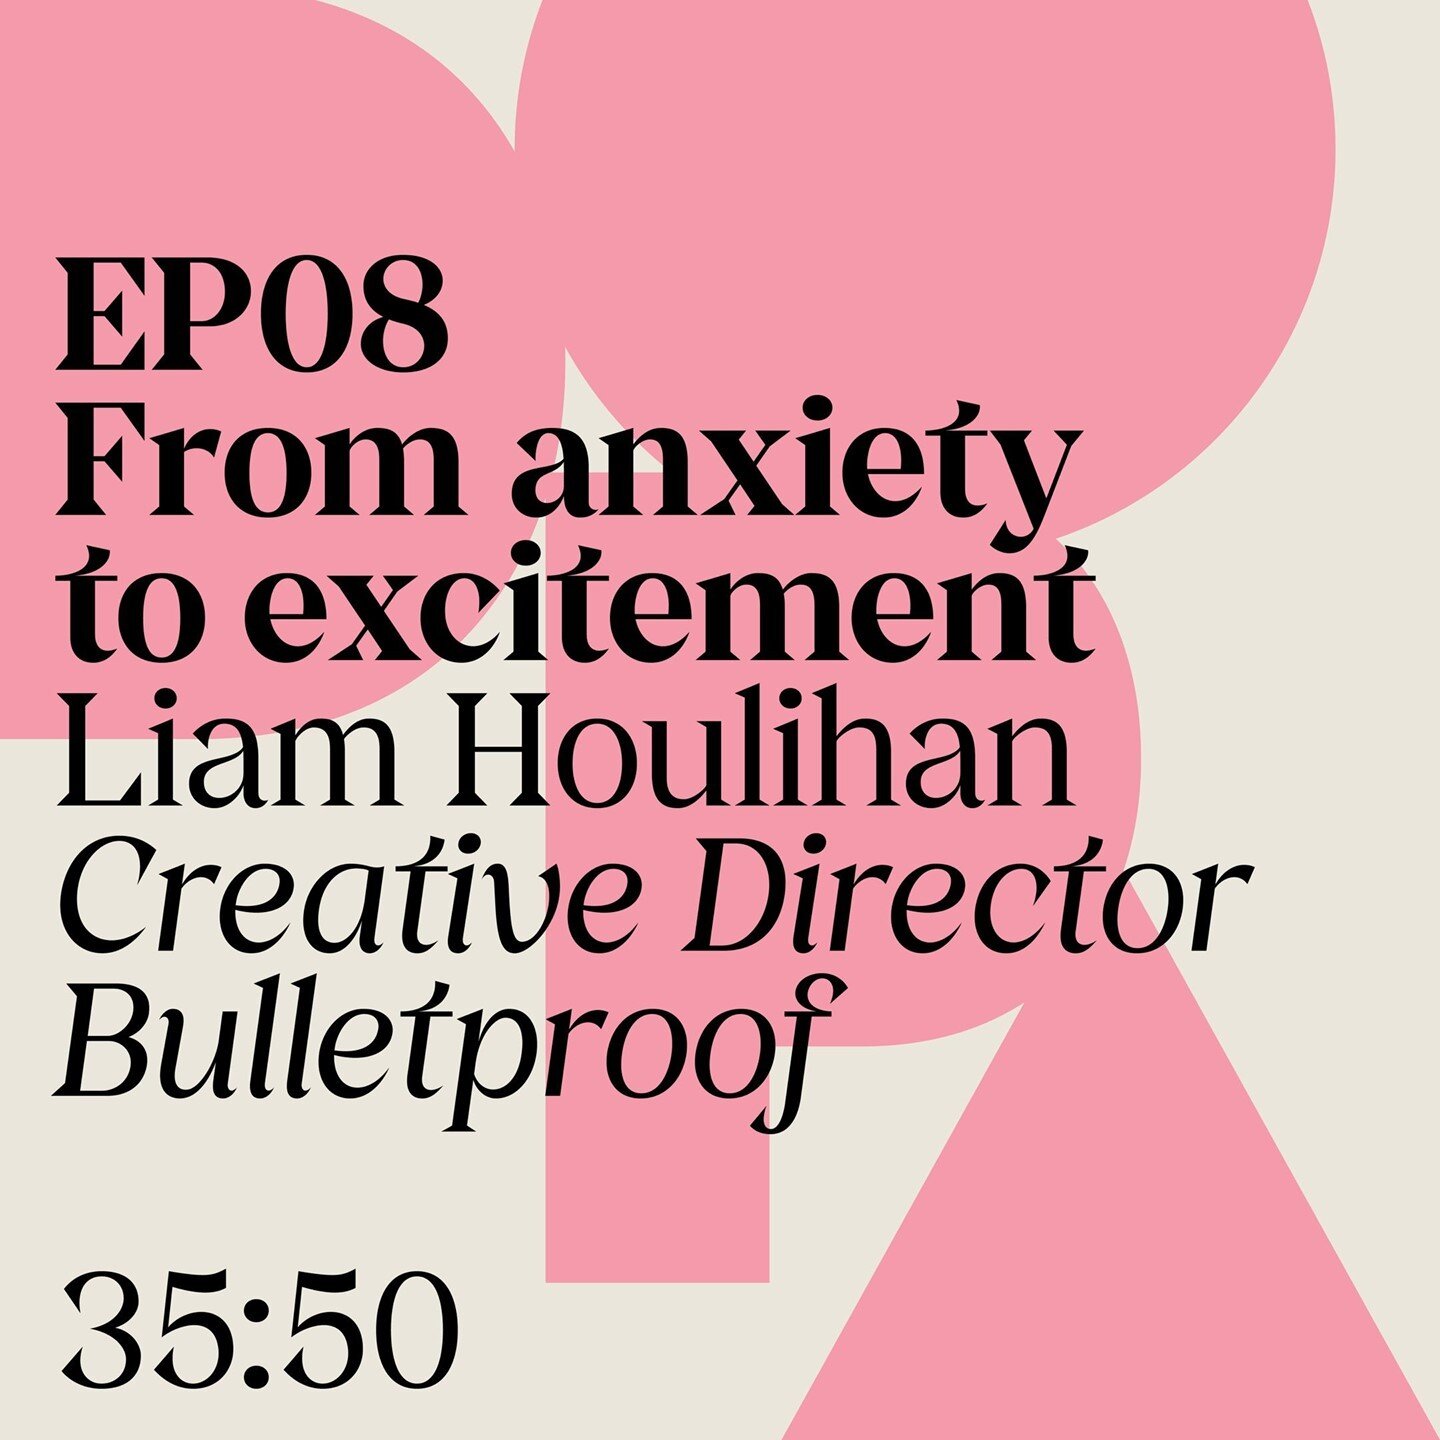 EP08 is out now. ⁠
WARNING: This podcast will affect your mind (in a positive way).⁠
⁠
EP08 features Liam Houlihan, Creative Director @bulletproofintl, Amsterdam.⁠
⁠
In this episode, we discuss how to have a healthy perspective on anxiety and how to 